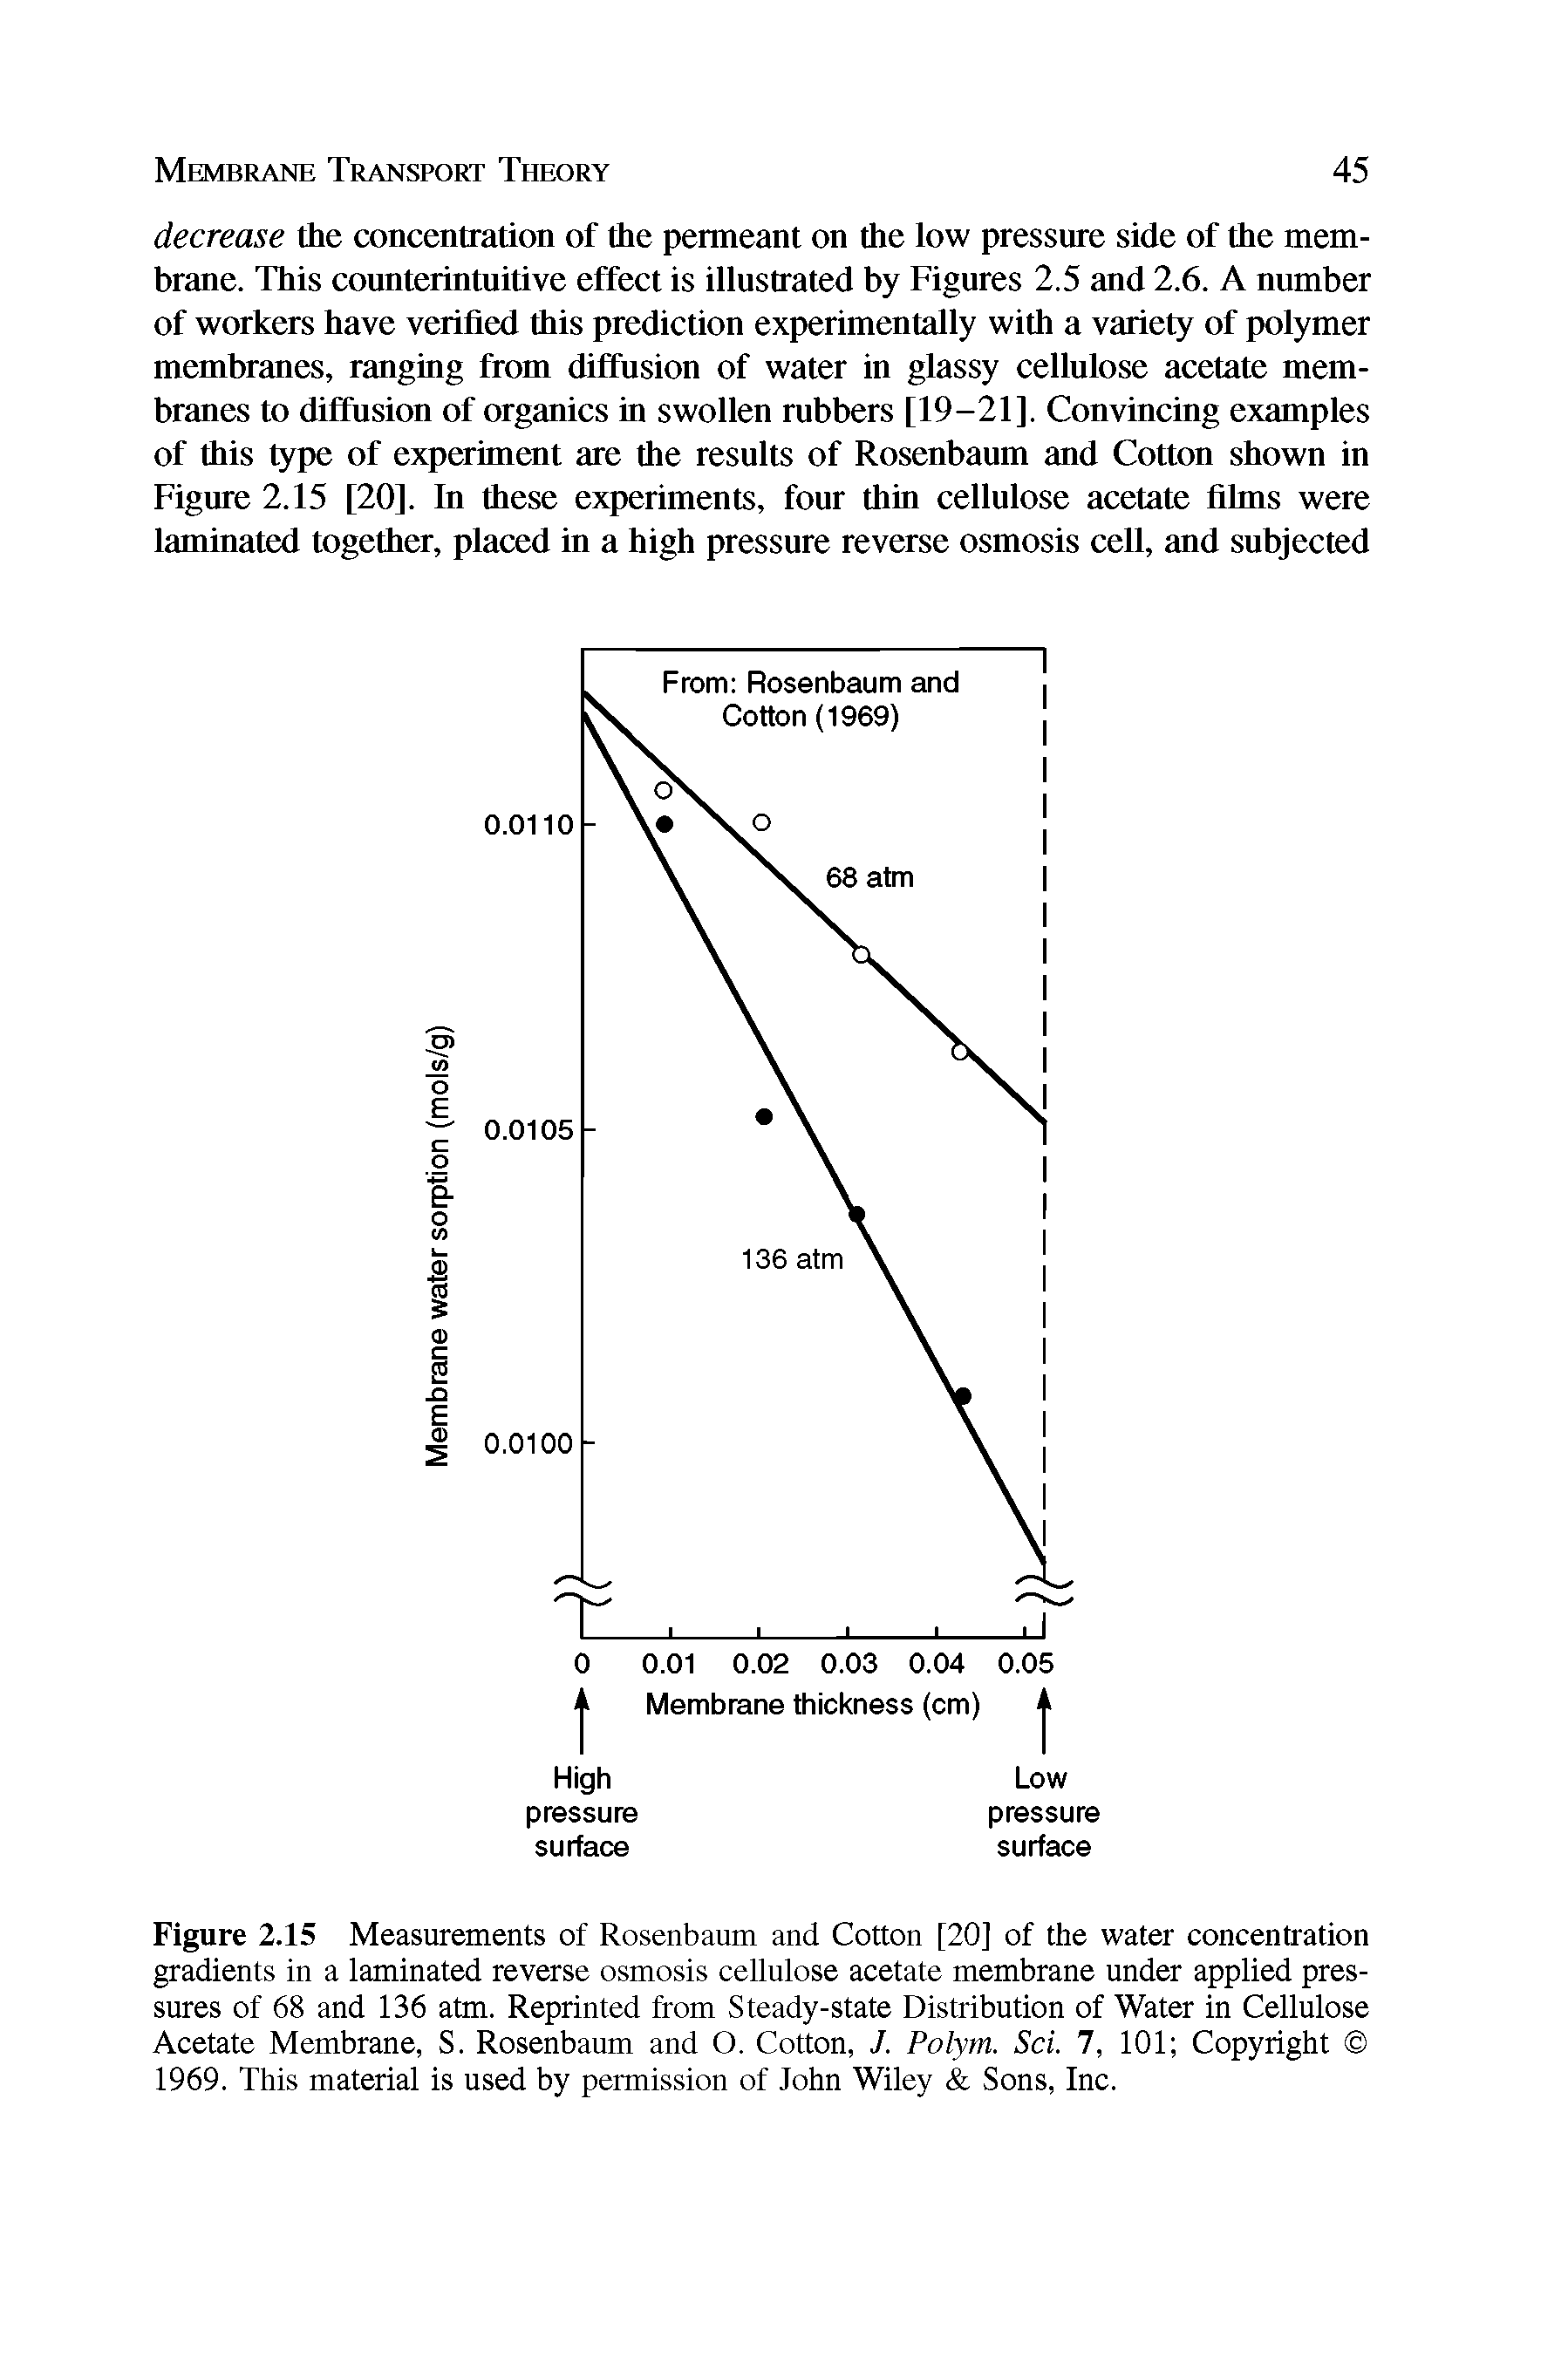 Figure 2.15 Measurements of Rosenbaum and Cotton [20] of the water concentration gradients in a laminated reverse osmosis cellulose acetate membrane under applied pressures of 68 and 136 atm. Reprinted from Steady-state Distribution of Water in Cellulose Acetate Membrane, S. Rosenbaum and O. Cotton, J. Polym. Sci. 7, 101 Copyright 1969. This material is used by permission of John Wiley Sons, Inc.